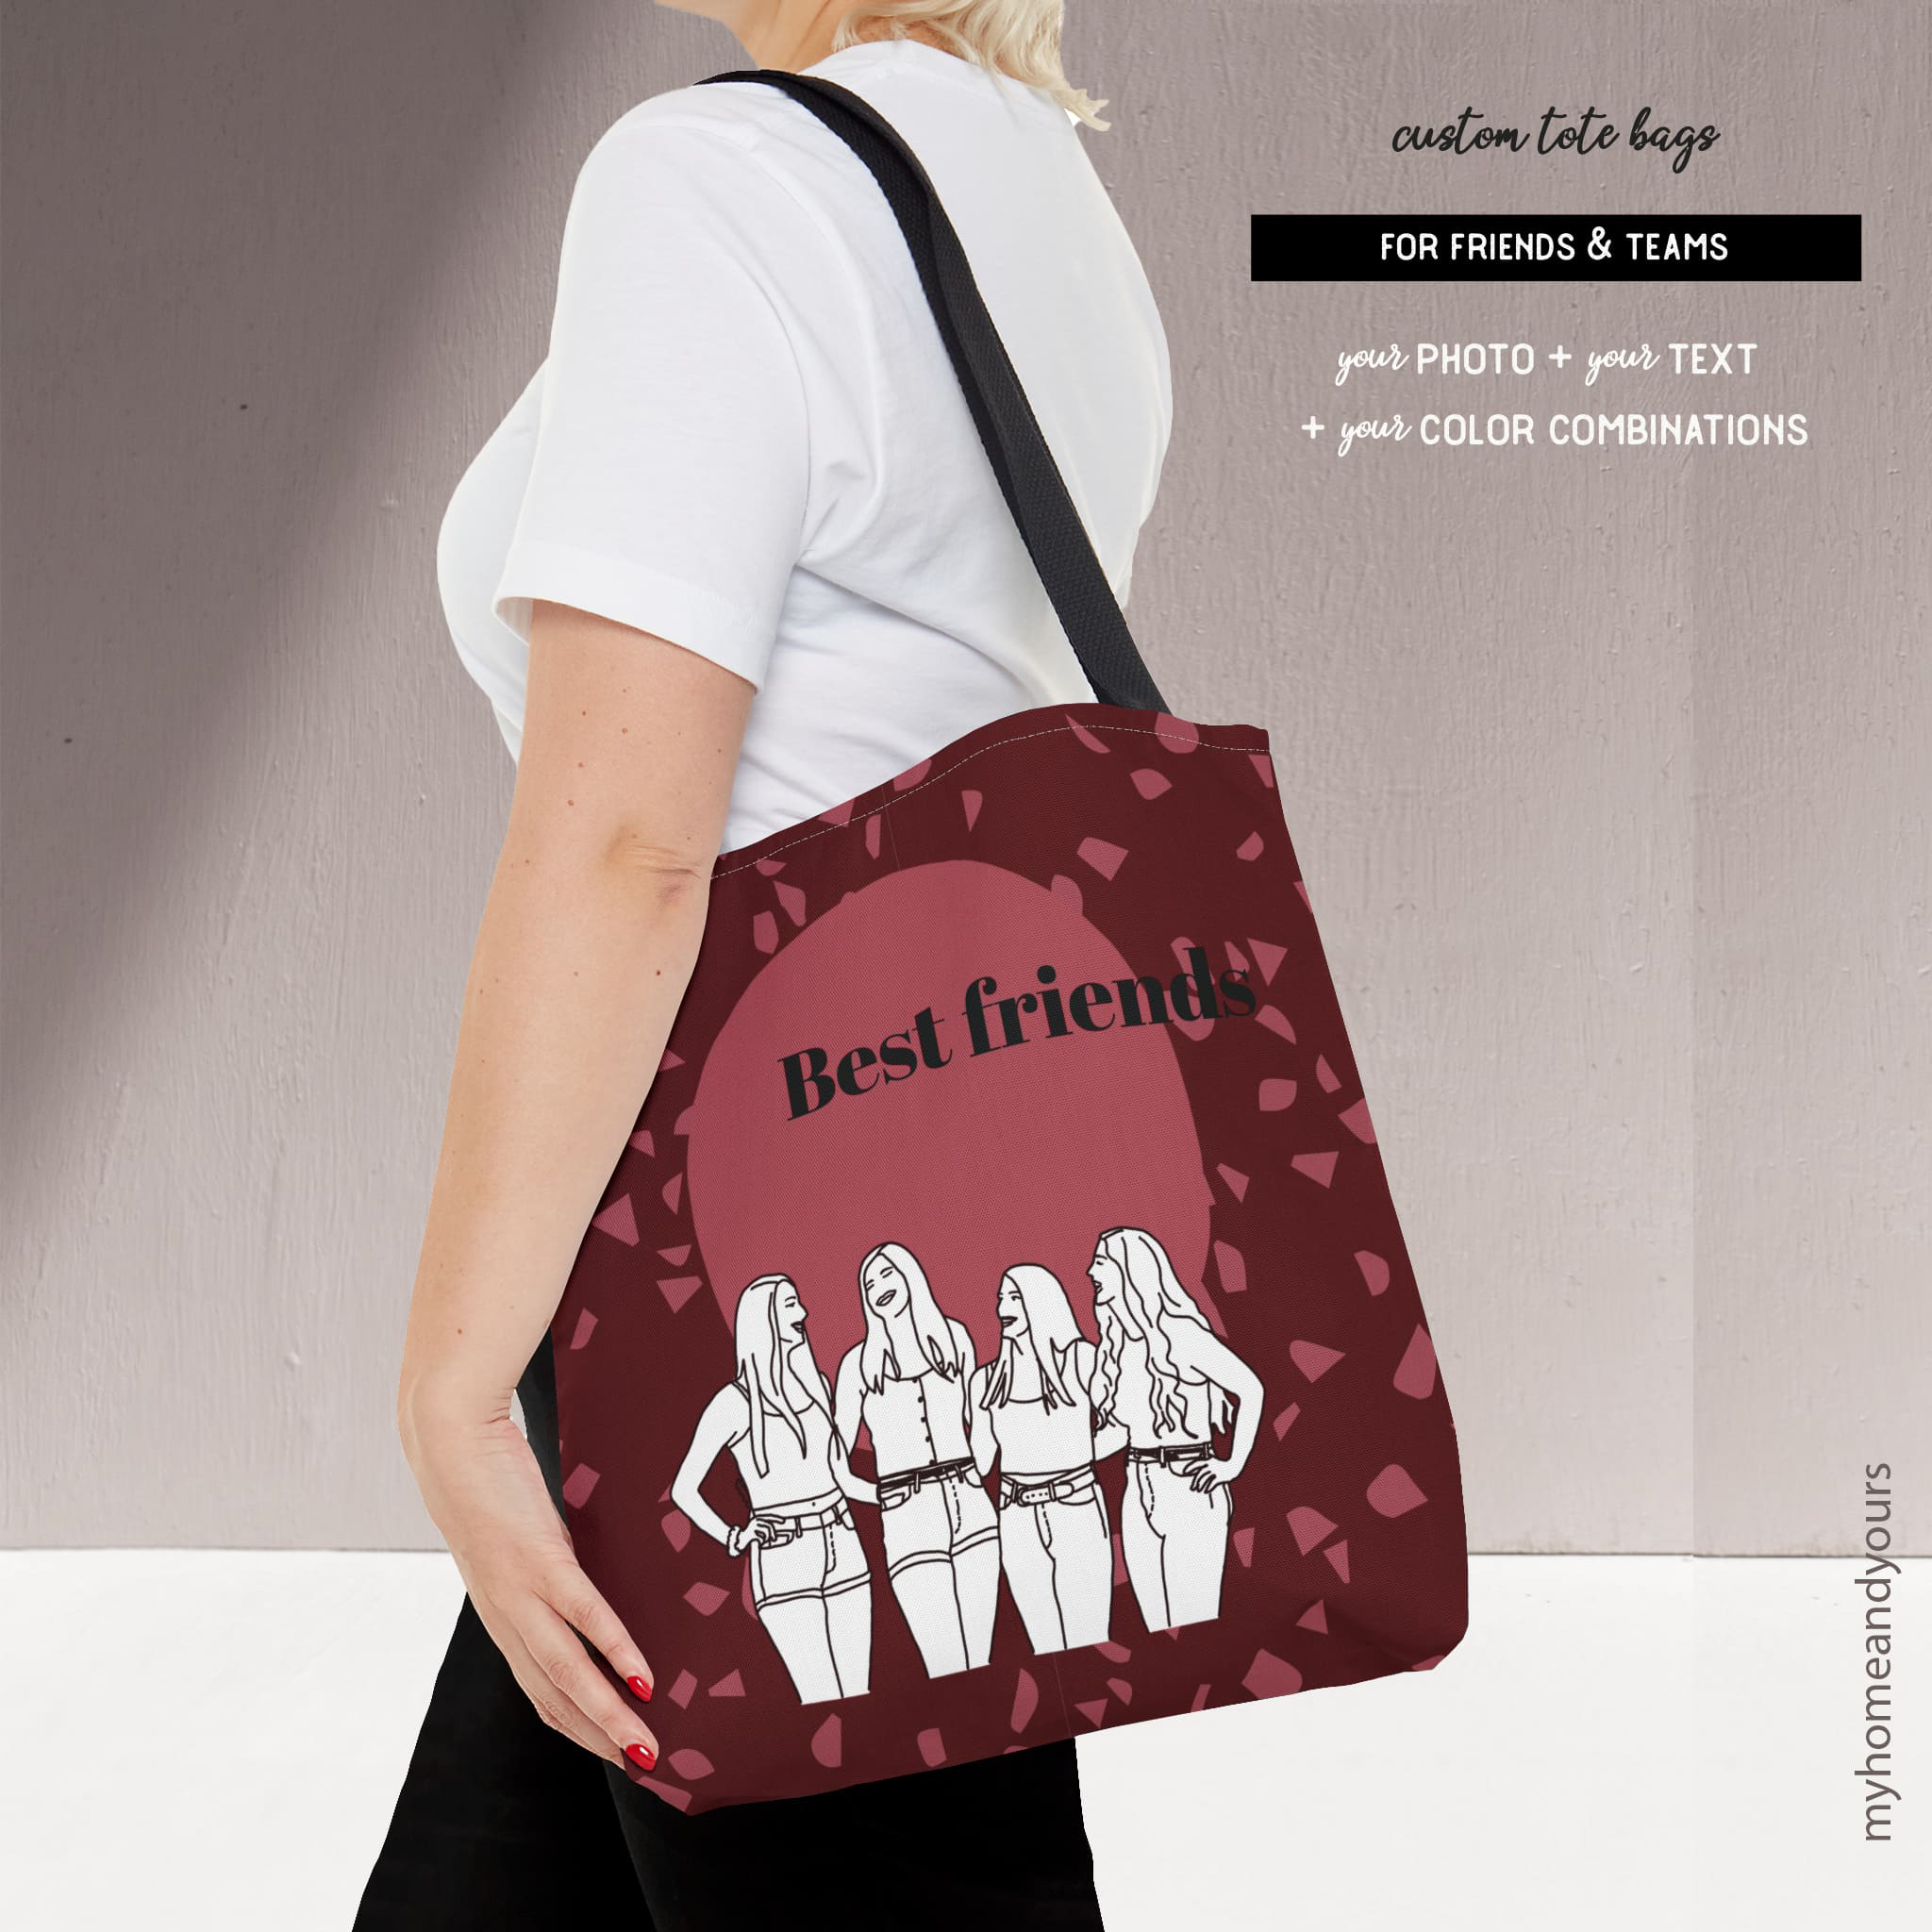 custome tote bags for best friends and teams with line art portrait illustration from your photo on colorful terrazzo patterned background patterns and color blocking designs